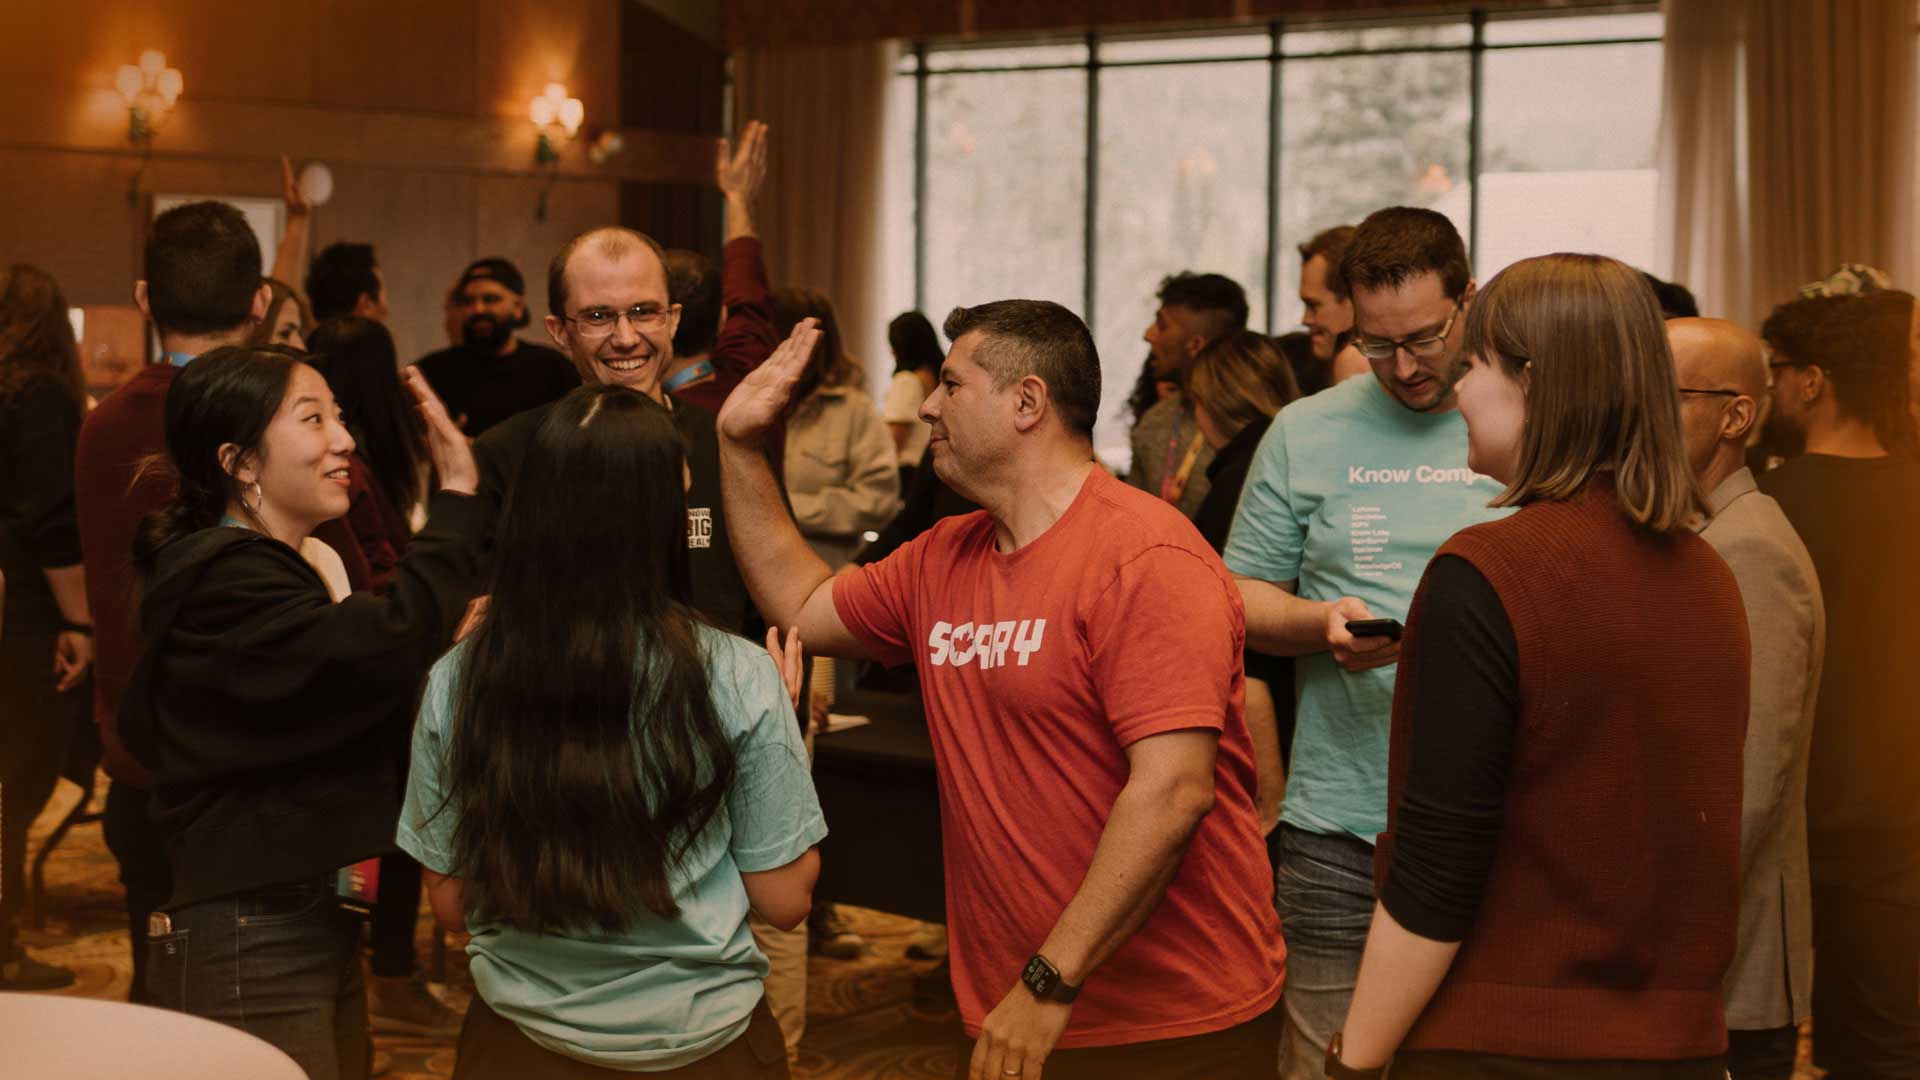 A photo of a two Know Company employees high-fiving surrounded by other employees.